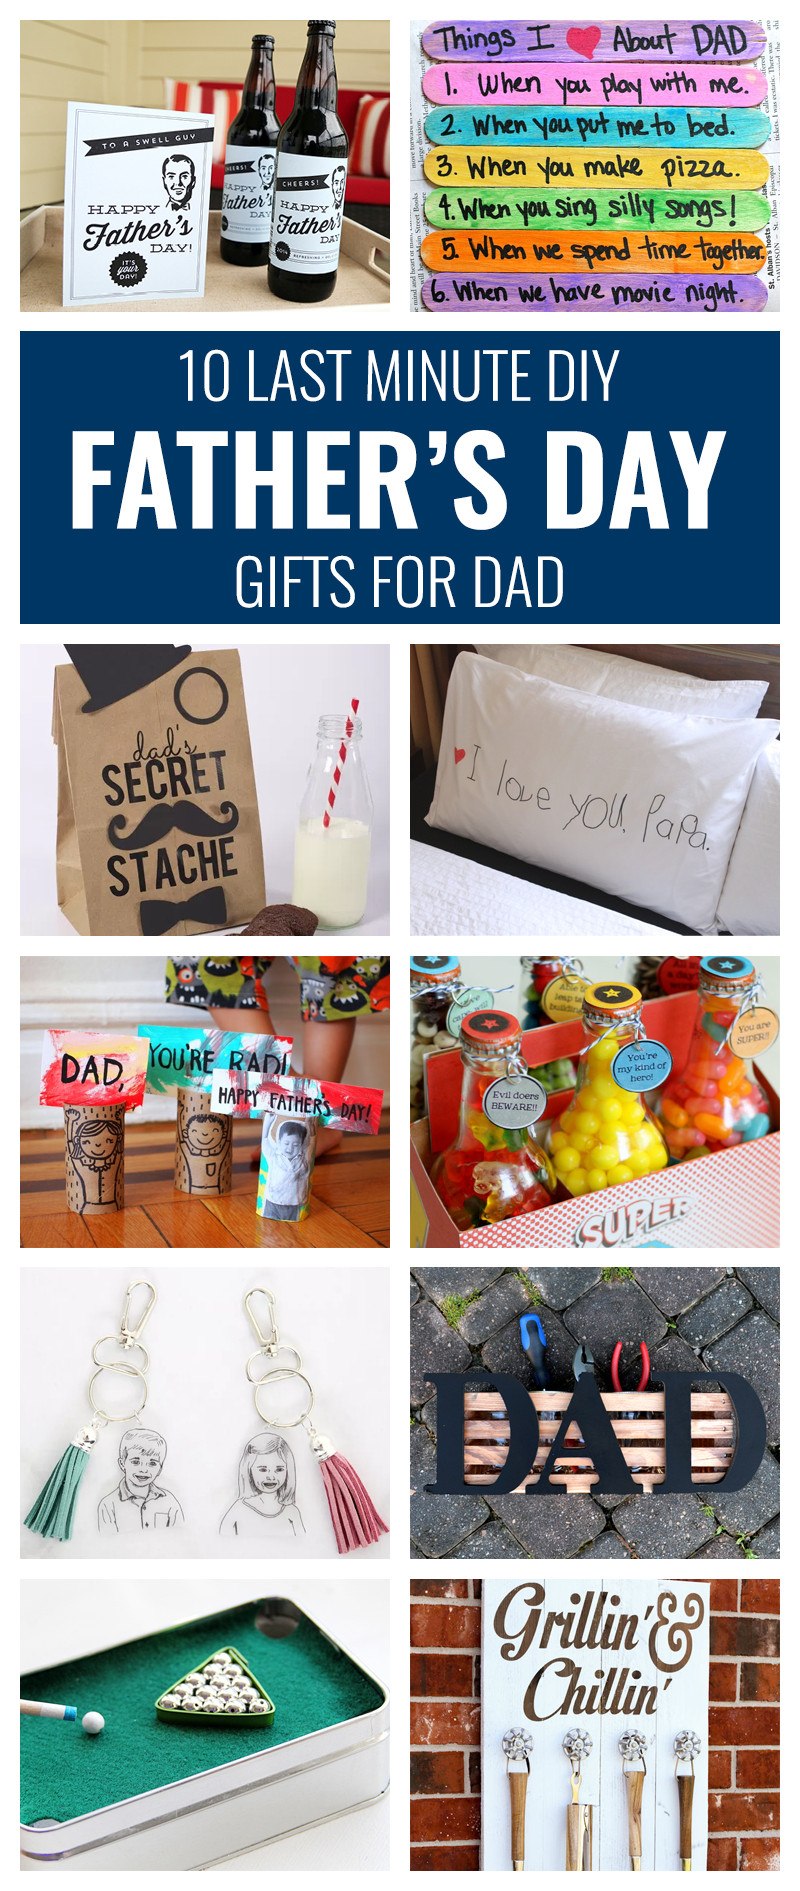 DIY Birthday Gifts For Dad
 10 Last Minute DIY Father s Day Gifts for Dad